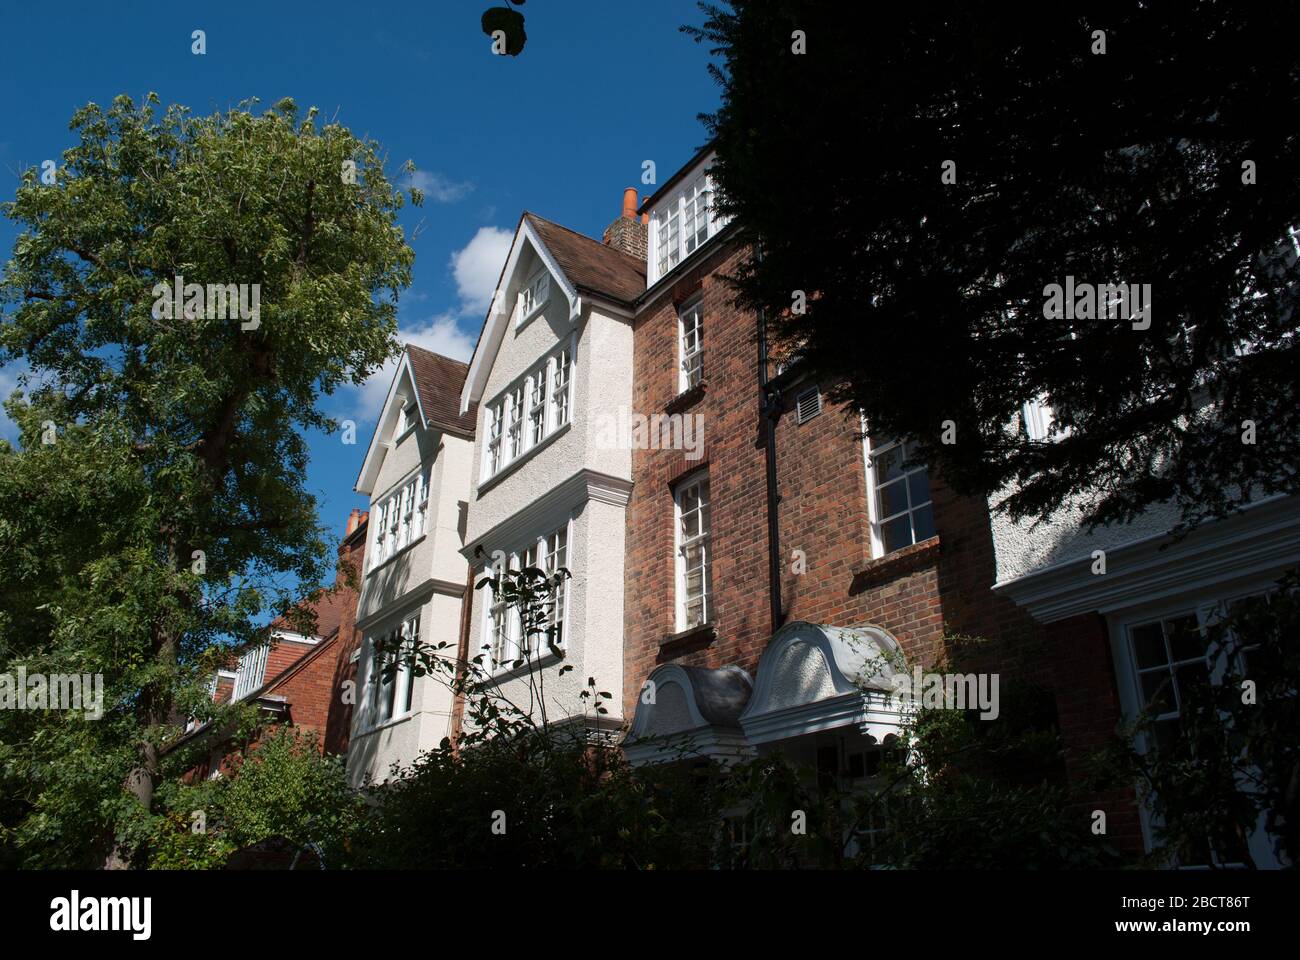 Queen Anne Revival Architecture Richard Norman Shaw Garden Suburb Woodstock Road, Turnham Green, Chiswick, London, W4 1DS Stock Photo